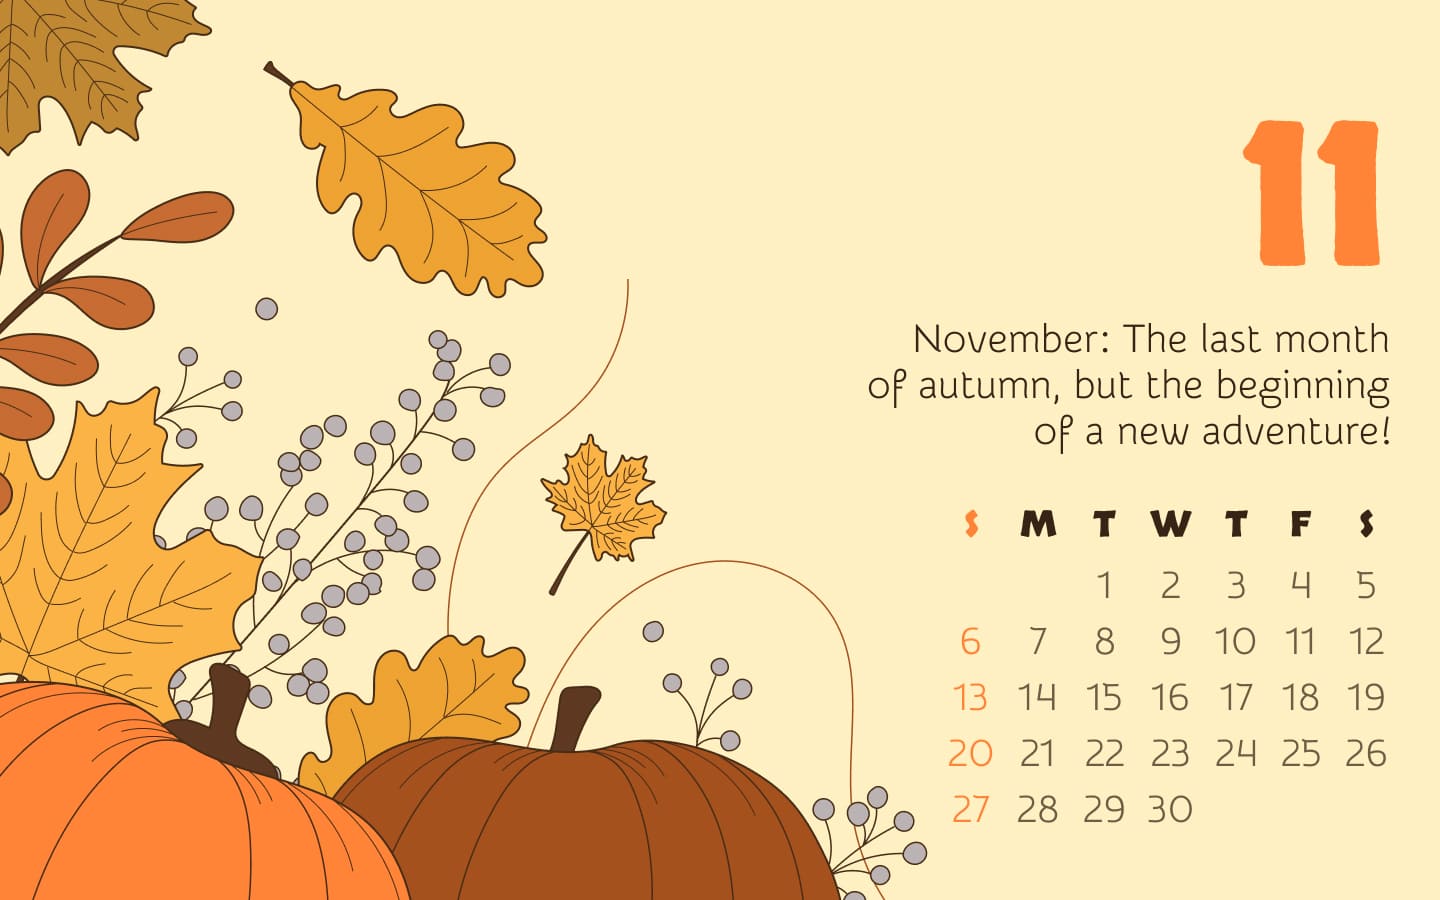 Calendar November in the picture size 1400x900.